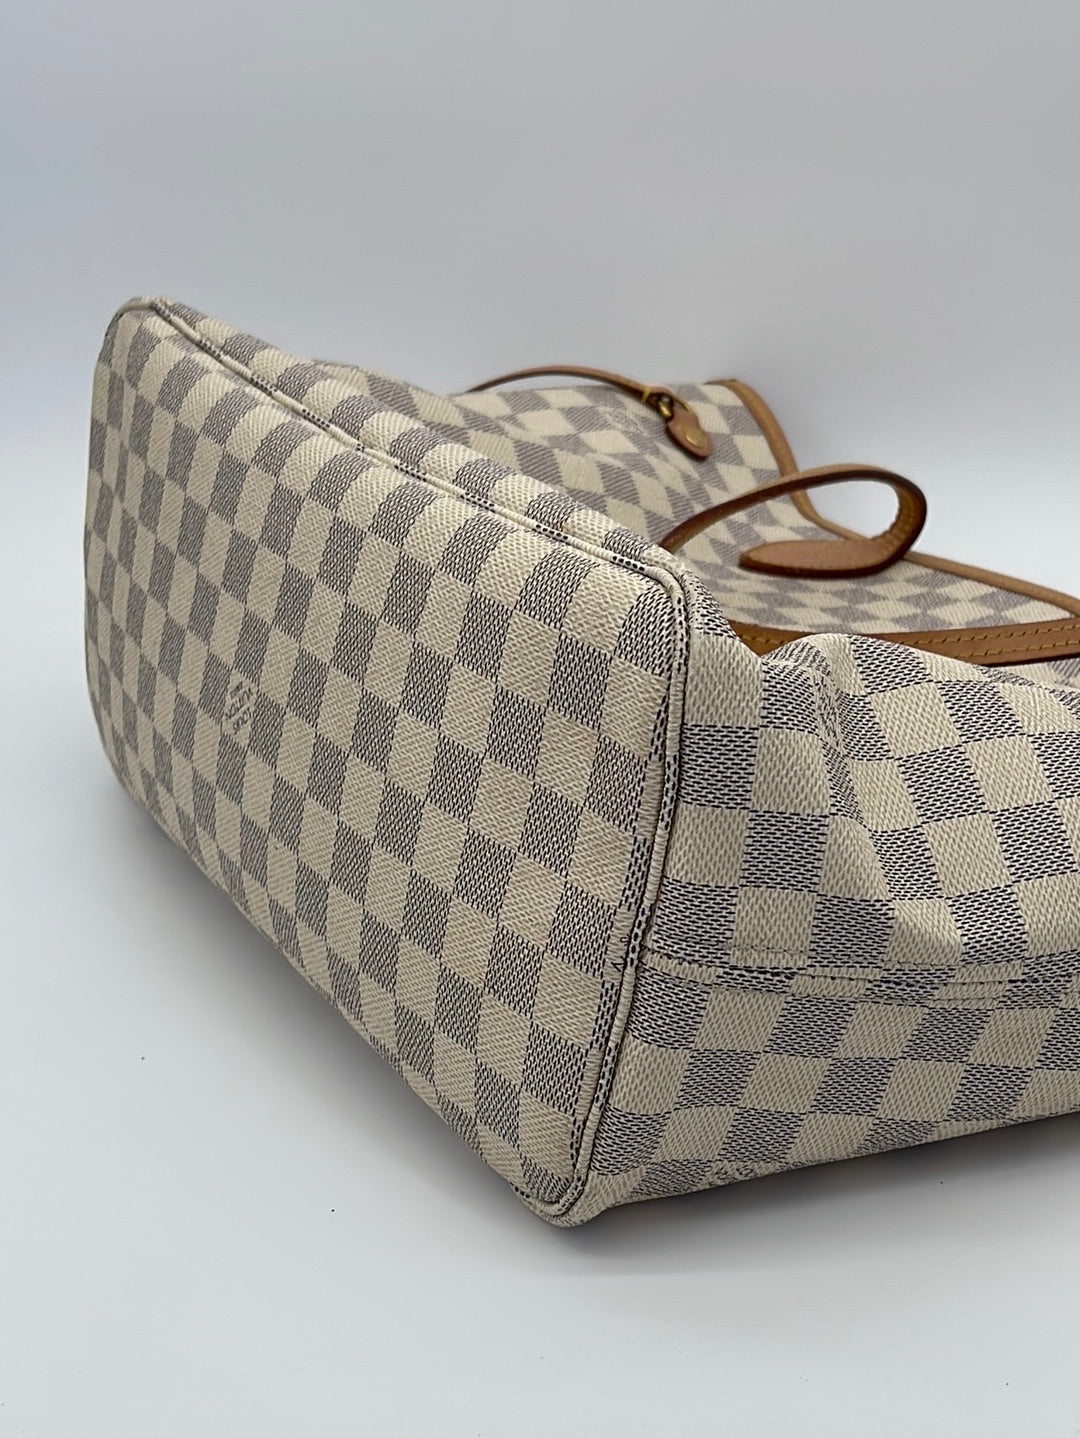 LOUIS VUITTON Damier Azur Neverfull PM Tote Bag N41362 LV Auth 30525A used